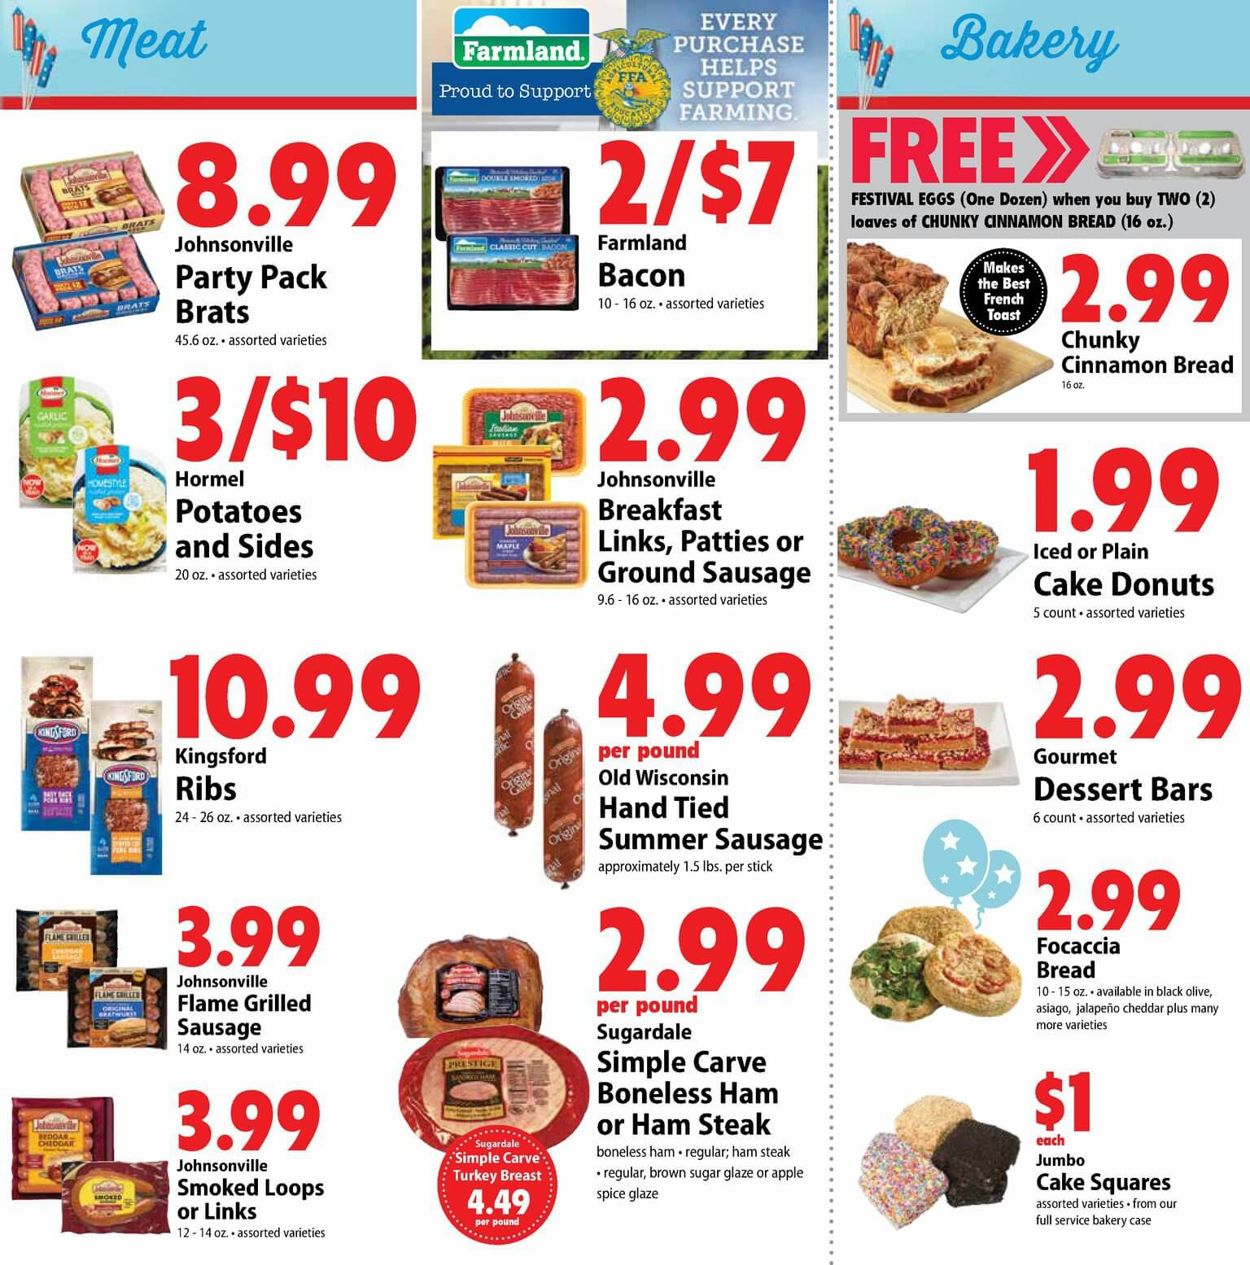 Festival Foods Current weekly ad 06/26 07/02/2019 [7]